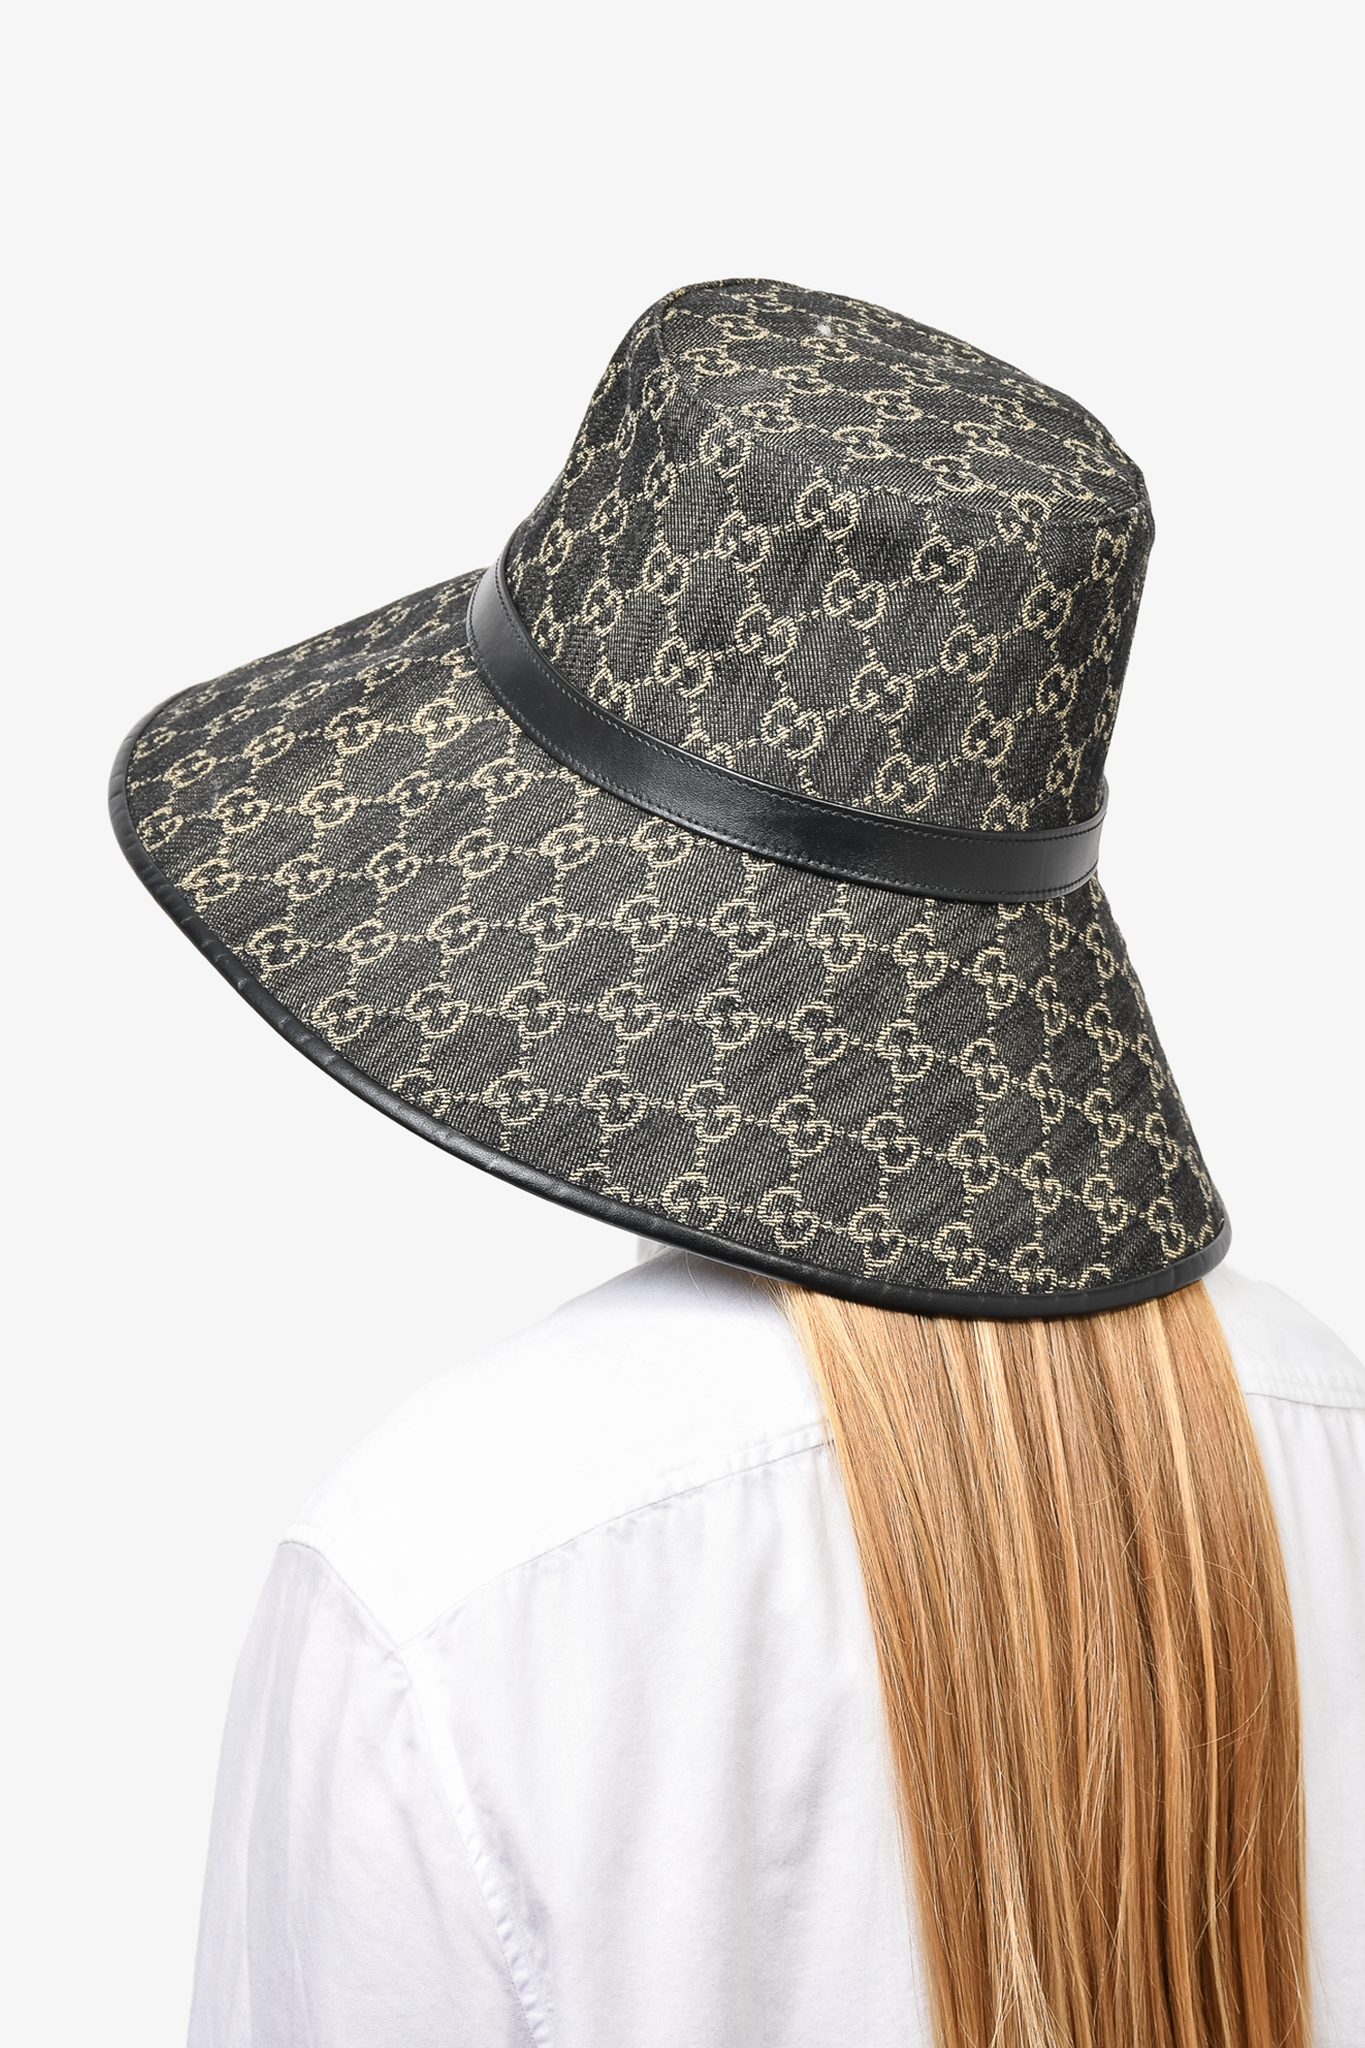 Leather-trimmed canvas-jacquard bucket hat